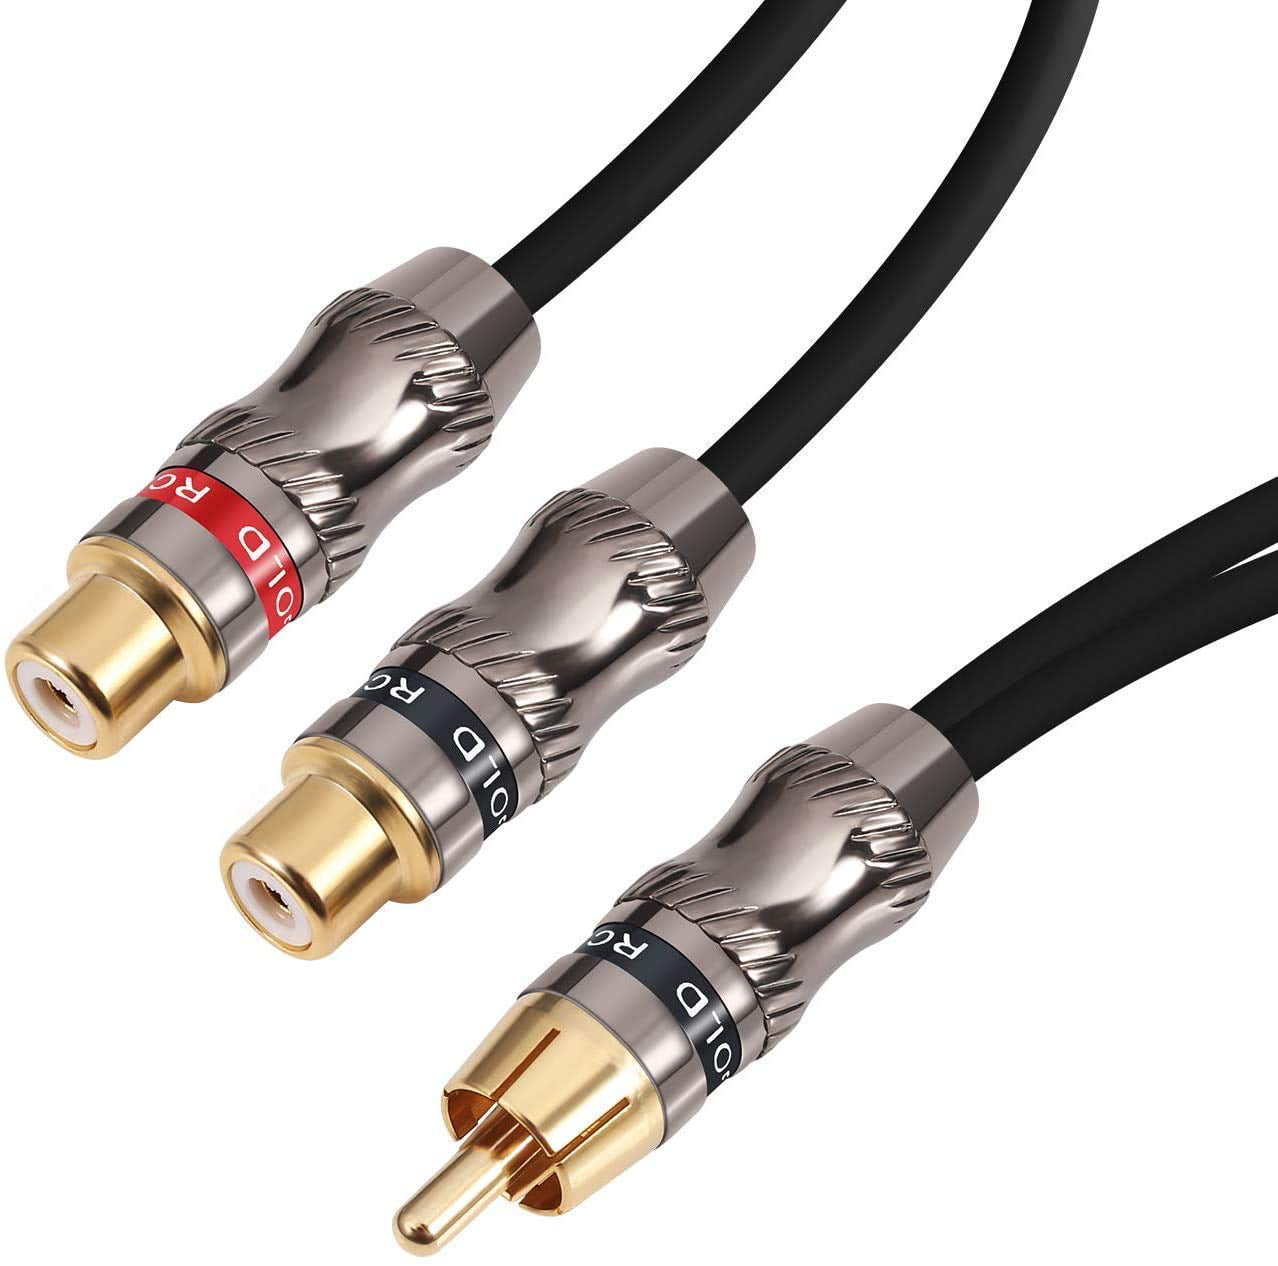 1 Male to 2 Female Y Splitter Connectors Extension Cord 8 inch Male Stereo Audio Y Adapter Subwoofer Cable 1 RCA FosPower Y Adapter to 2 RCA Female 24k Gold Plated